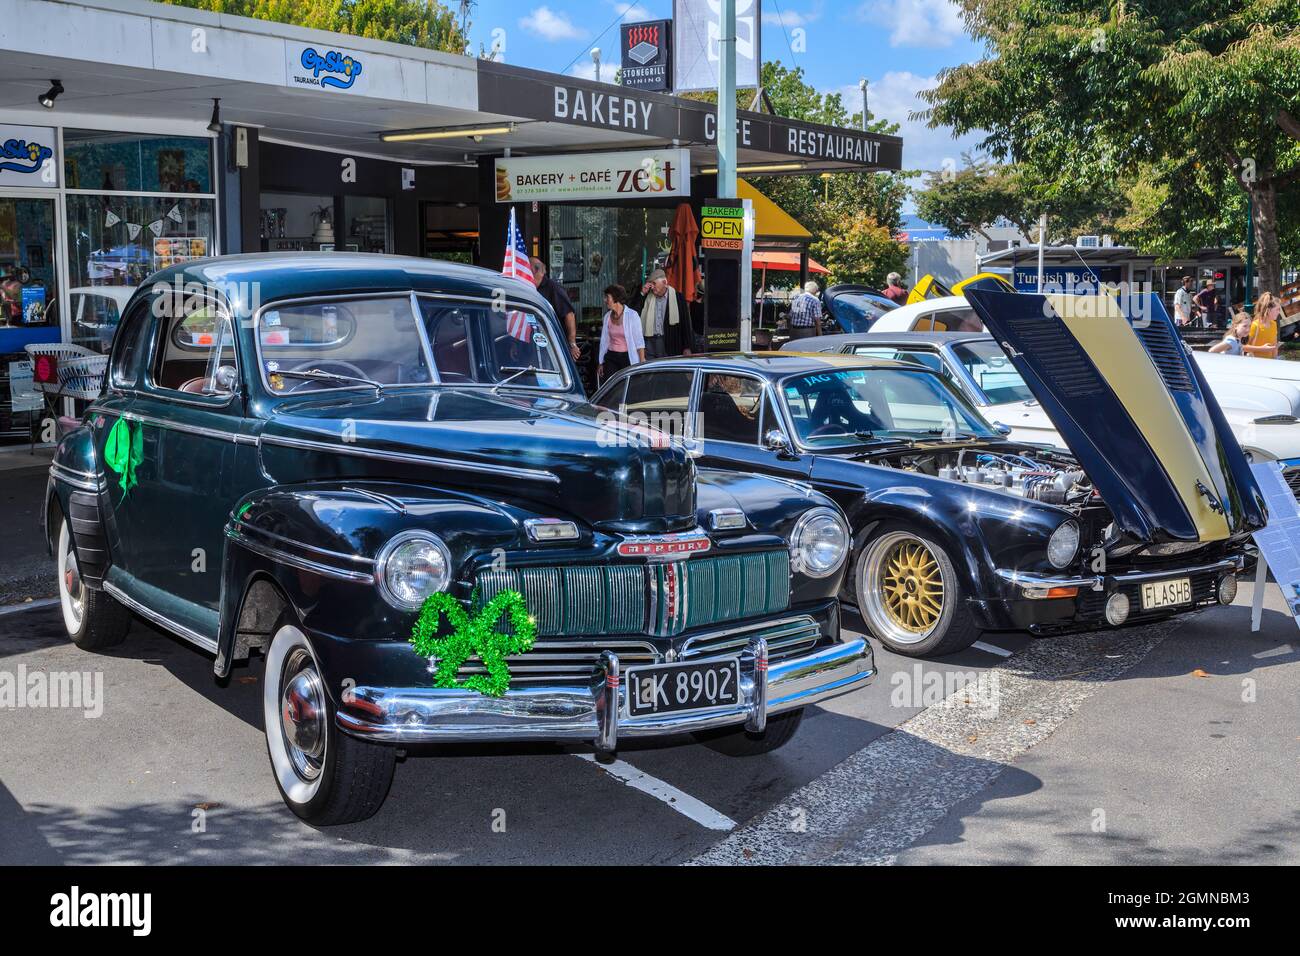 A 1947 Mercury Coupe and a 1974 Jaguar SJ6 at a classic car show in Tauranga, New Zealand Stock Photo